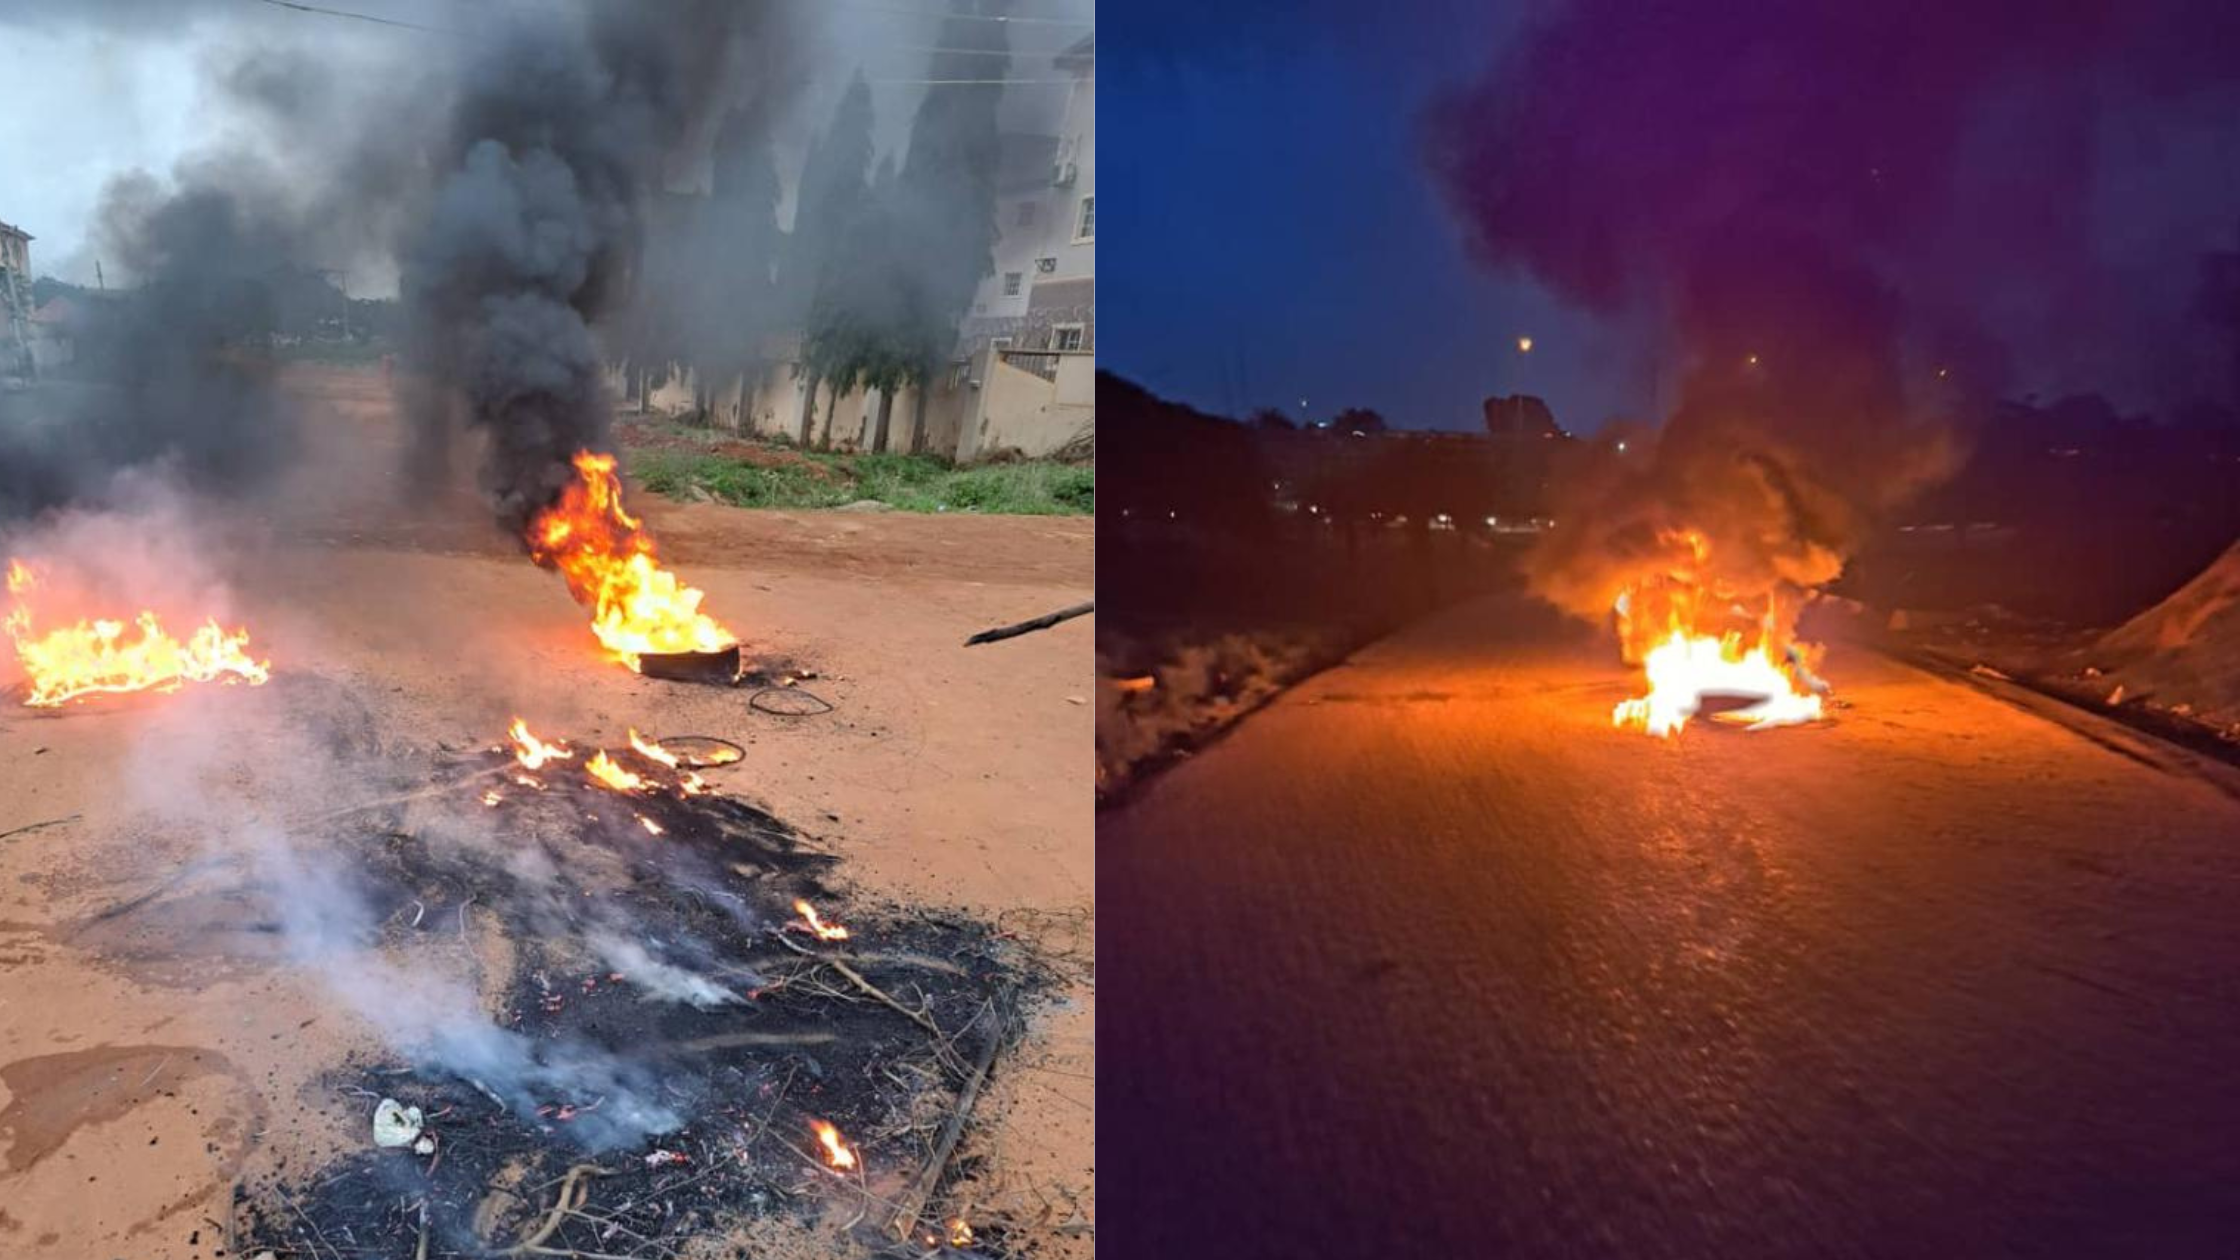 [GIST] Panic In Abuja As Commercial Motorcyclists Clash With Police, Attack Residents, Damage Vehicles